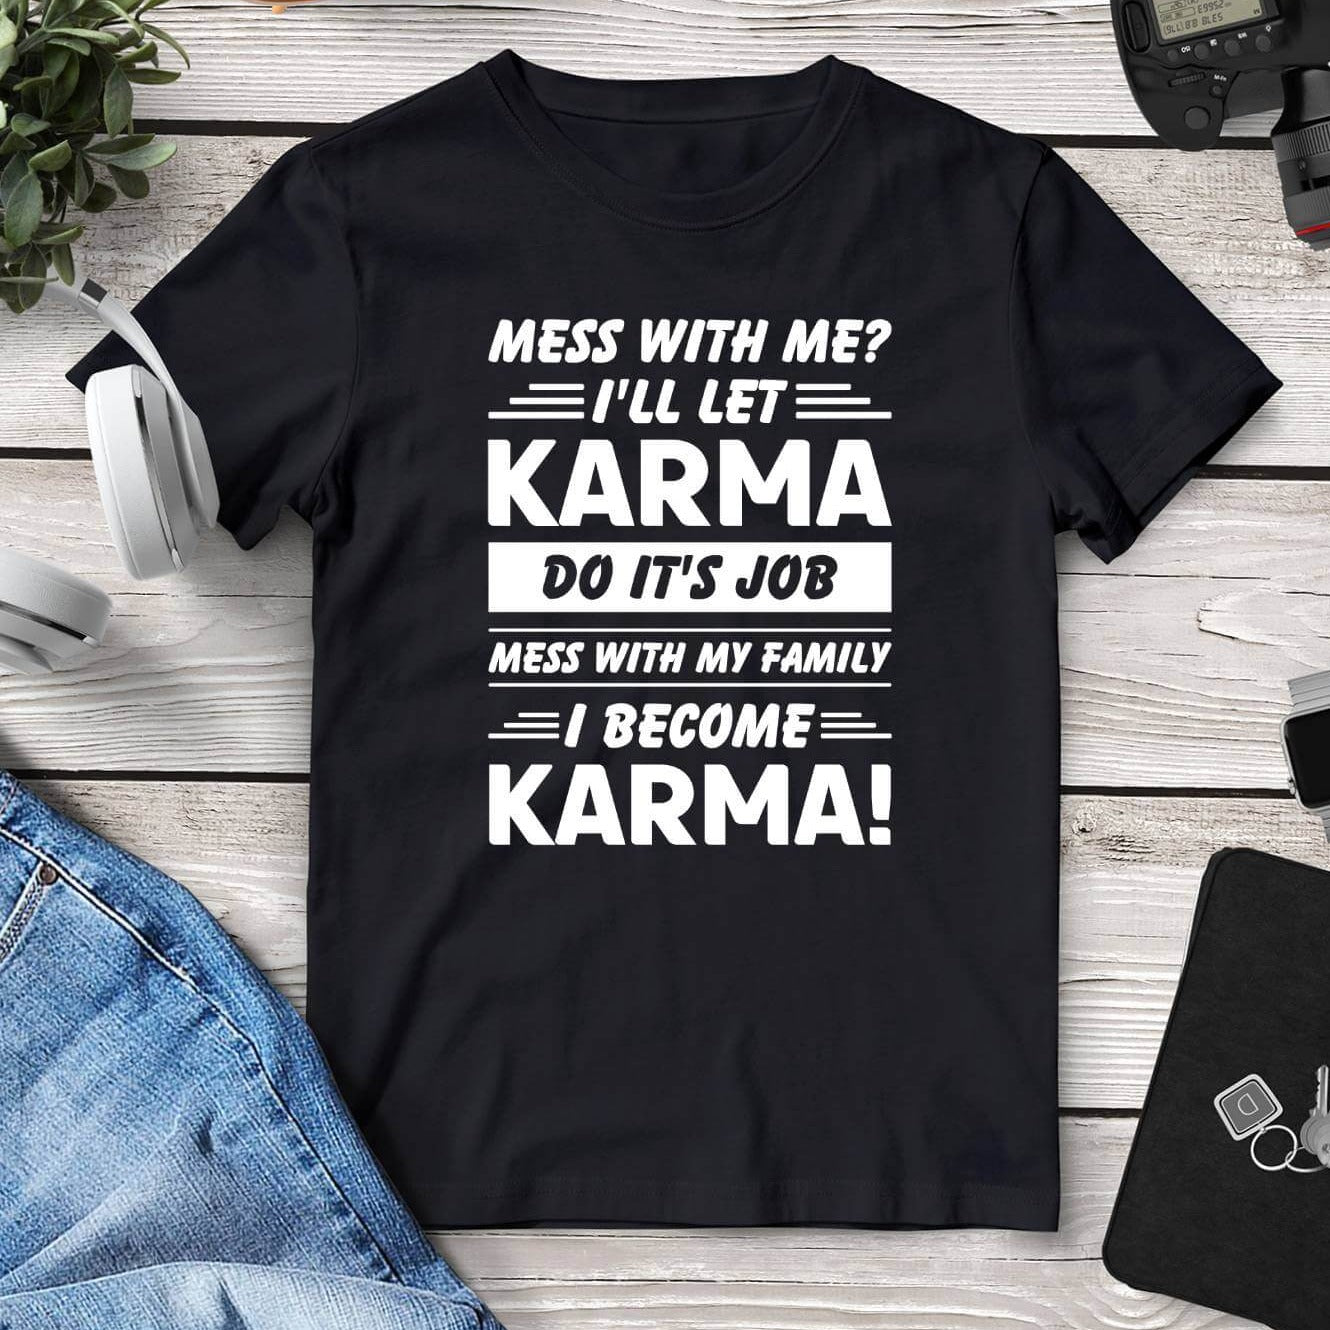 Mess With Me? I'll Let Karma Do It’s Job Tee. Shop Shirts & Tops on Mounteen. Worldwide shipping available.